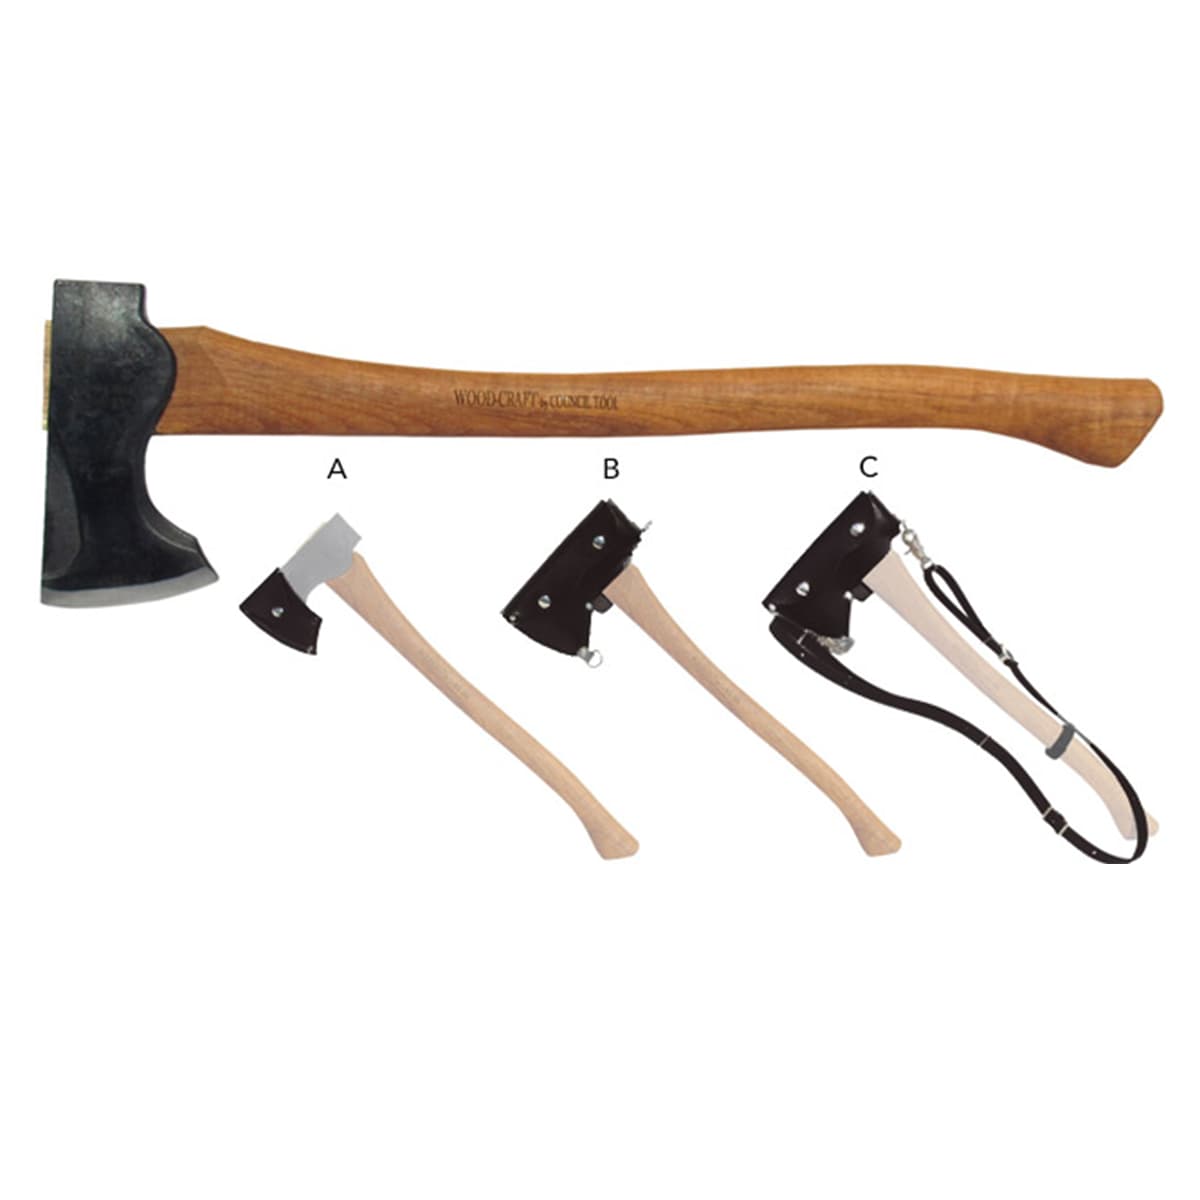 Wood-Craft Pack Axe with a 24" Handle